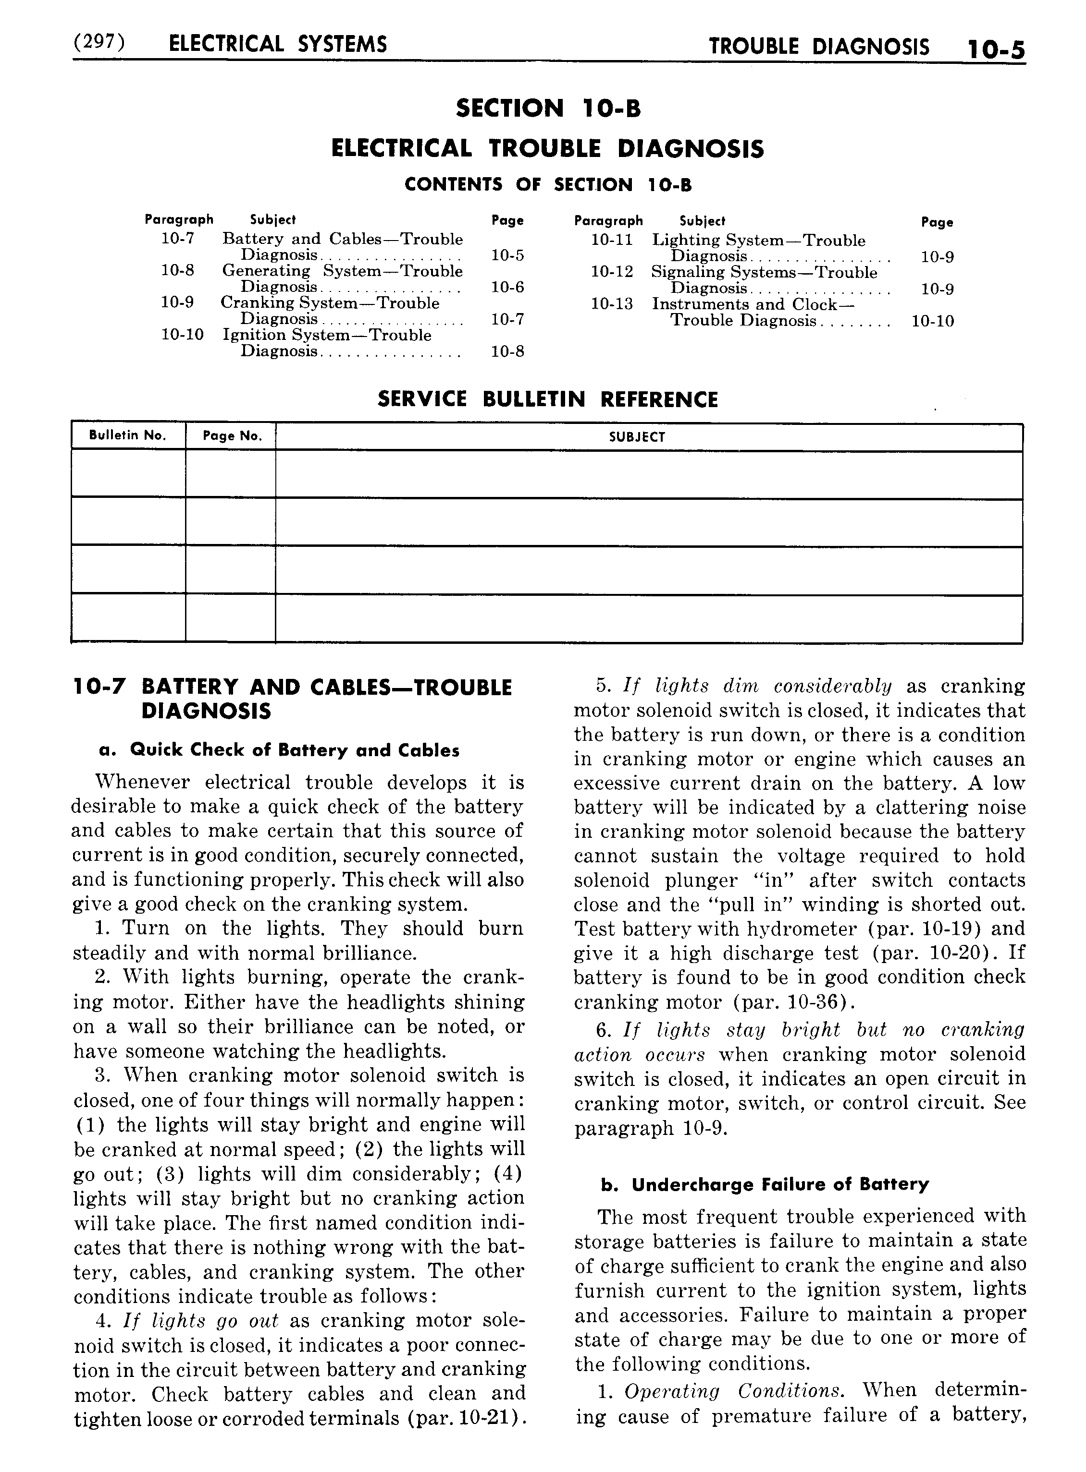 n_11 1951 Buick Shop Manual - Electrical Systems-005-005.jpg